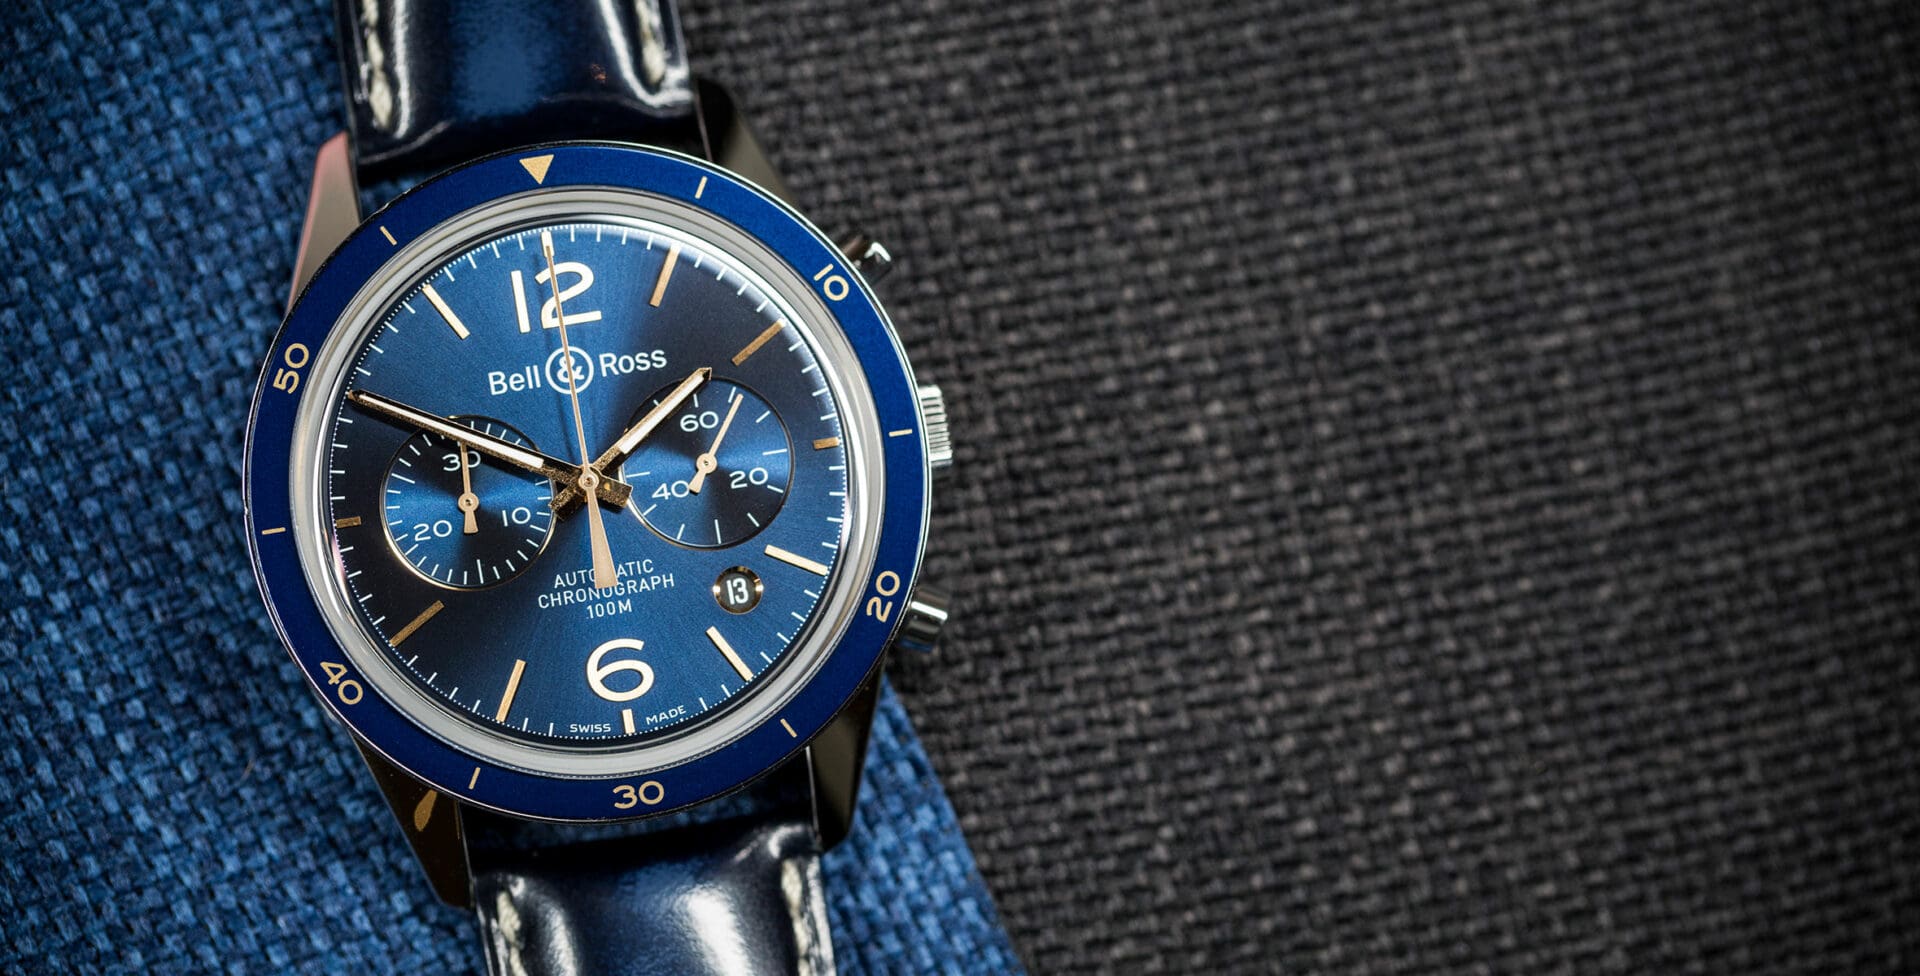 GONE IN 60 SECONDS: Dress blues – the Bell & Ross BR 126 Aeronavale video review